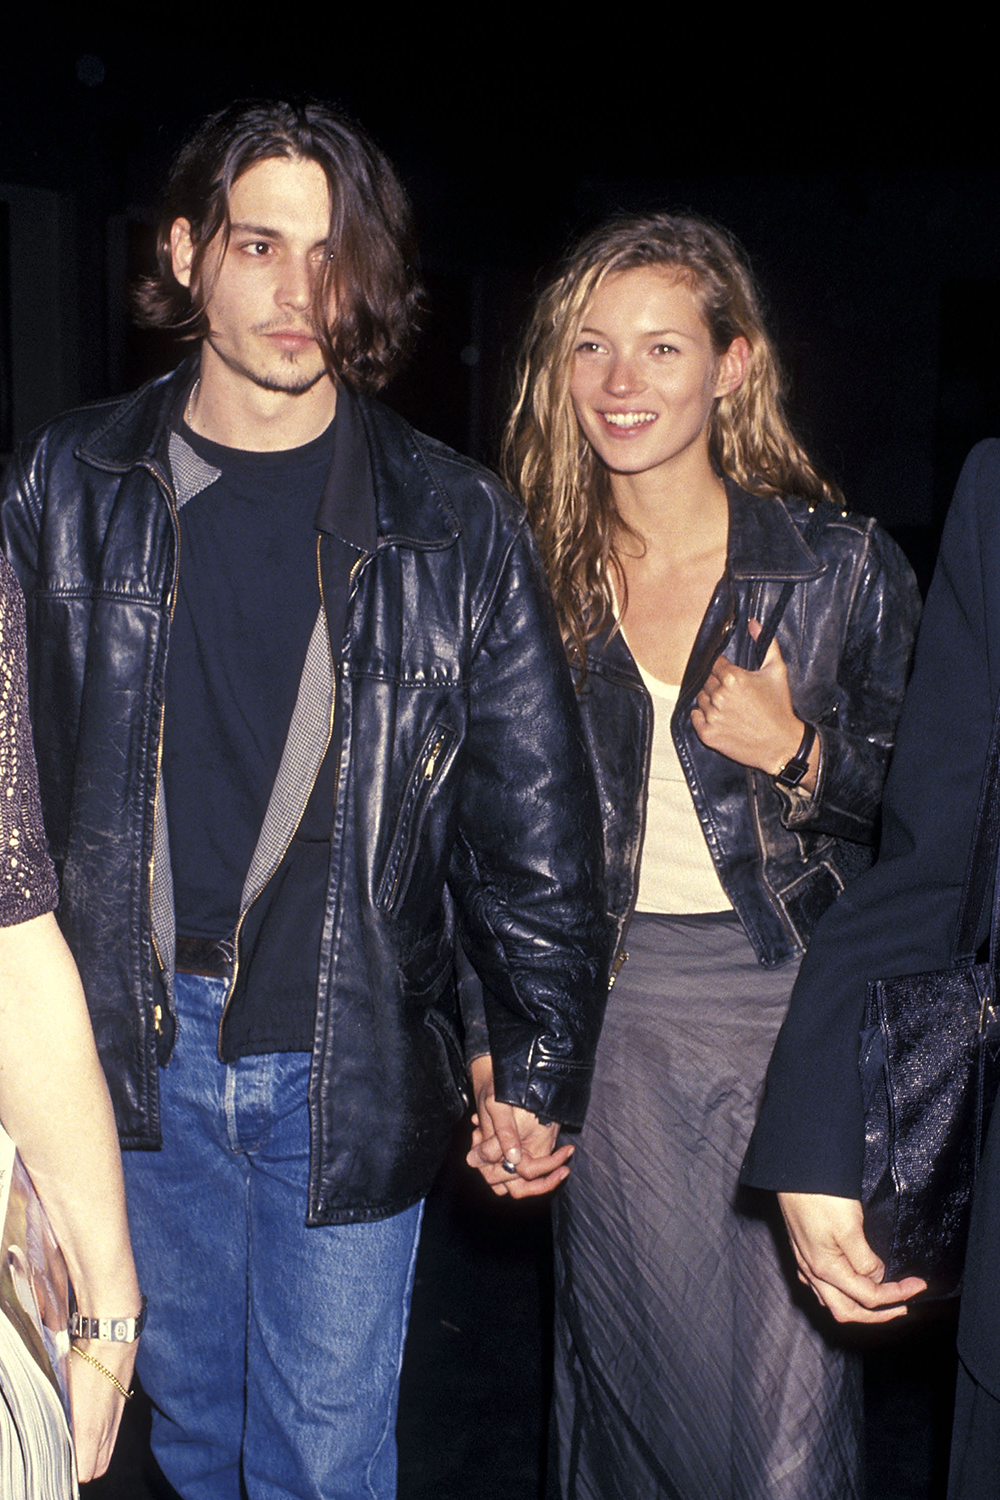 One of the most iconic couples of the 90s - yes, we can only be talking about Kate Moss and Johnny Depp. They met in 1994 but called it quits after four years.